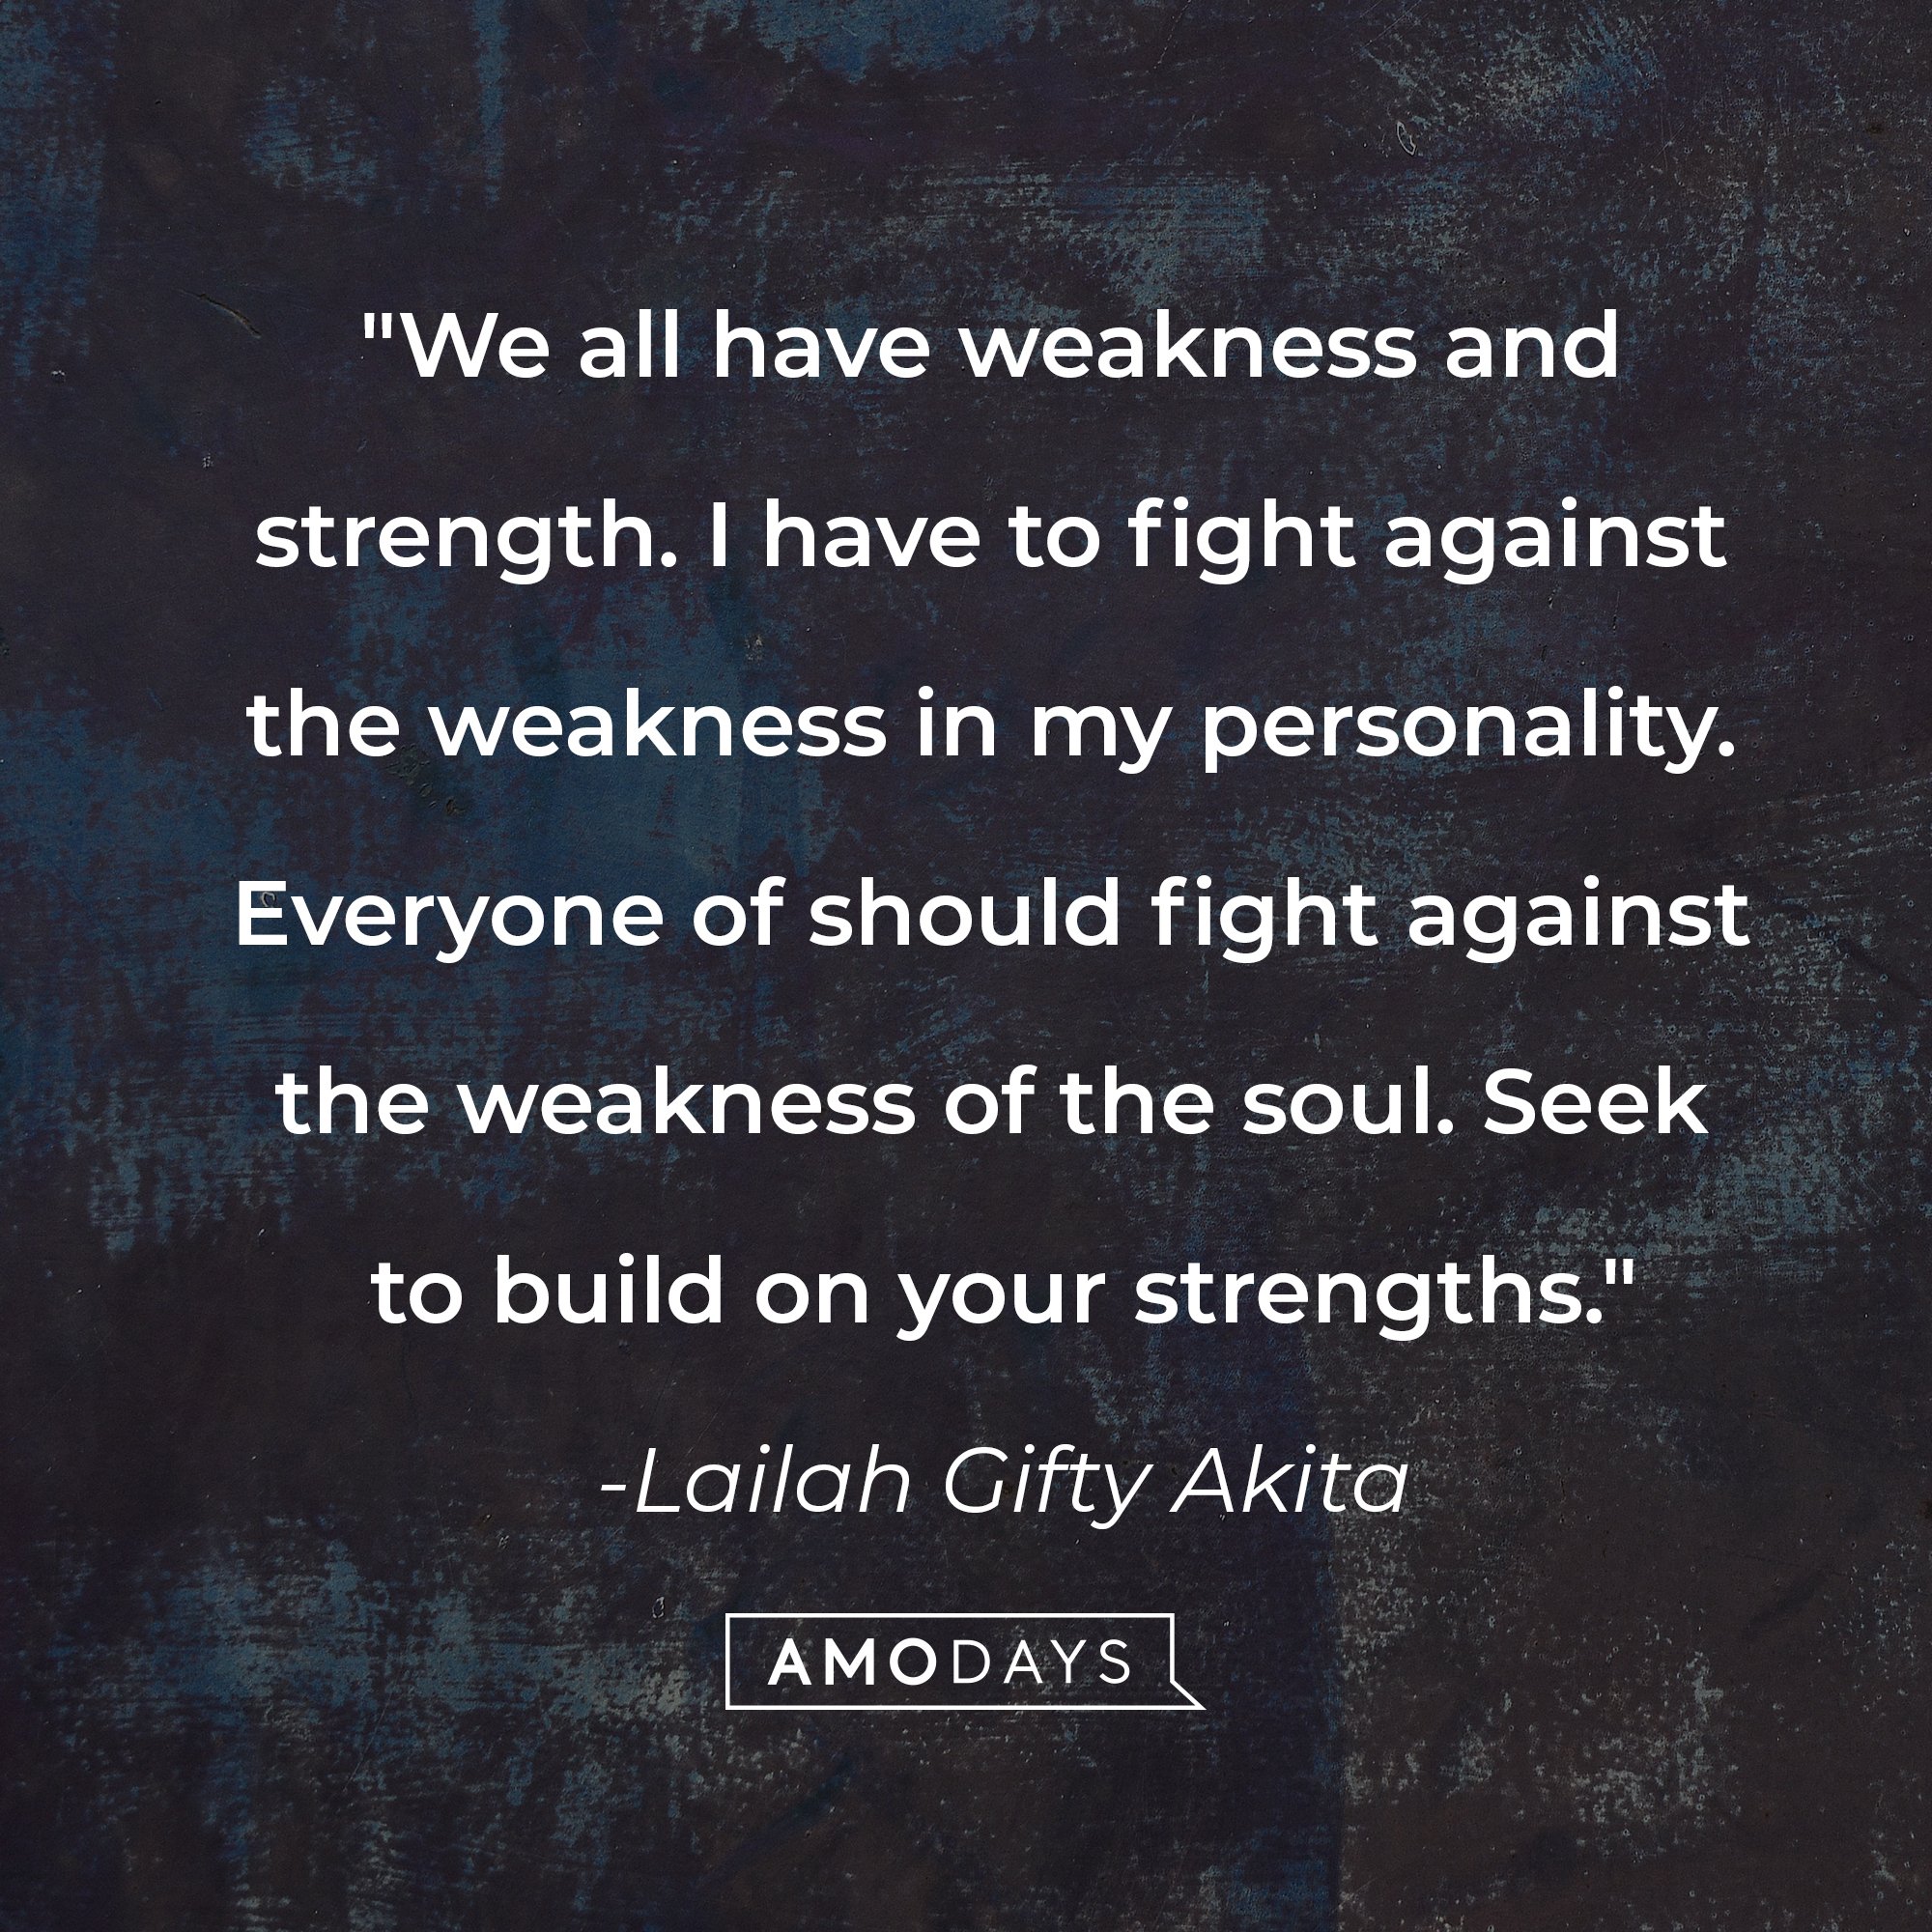 Lailah Gifty Akita's quote: "We all have weakness and strength. I have to fight against the weakness in my personality. Everyone should fight against the weakness of the soul. Seek to build on your strengths." | Image: AmoDays